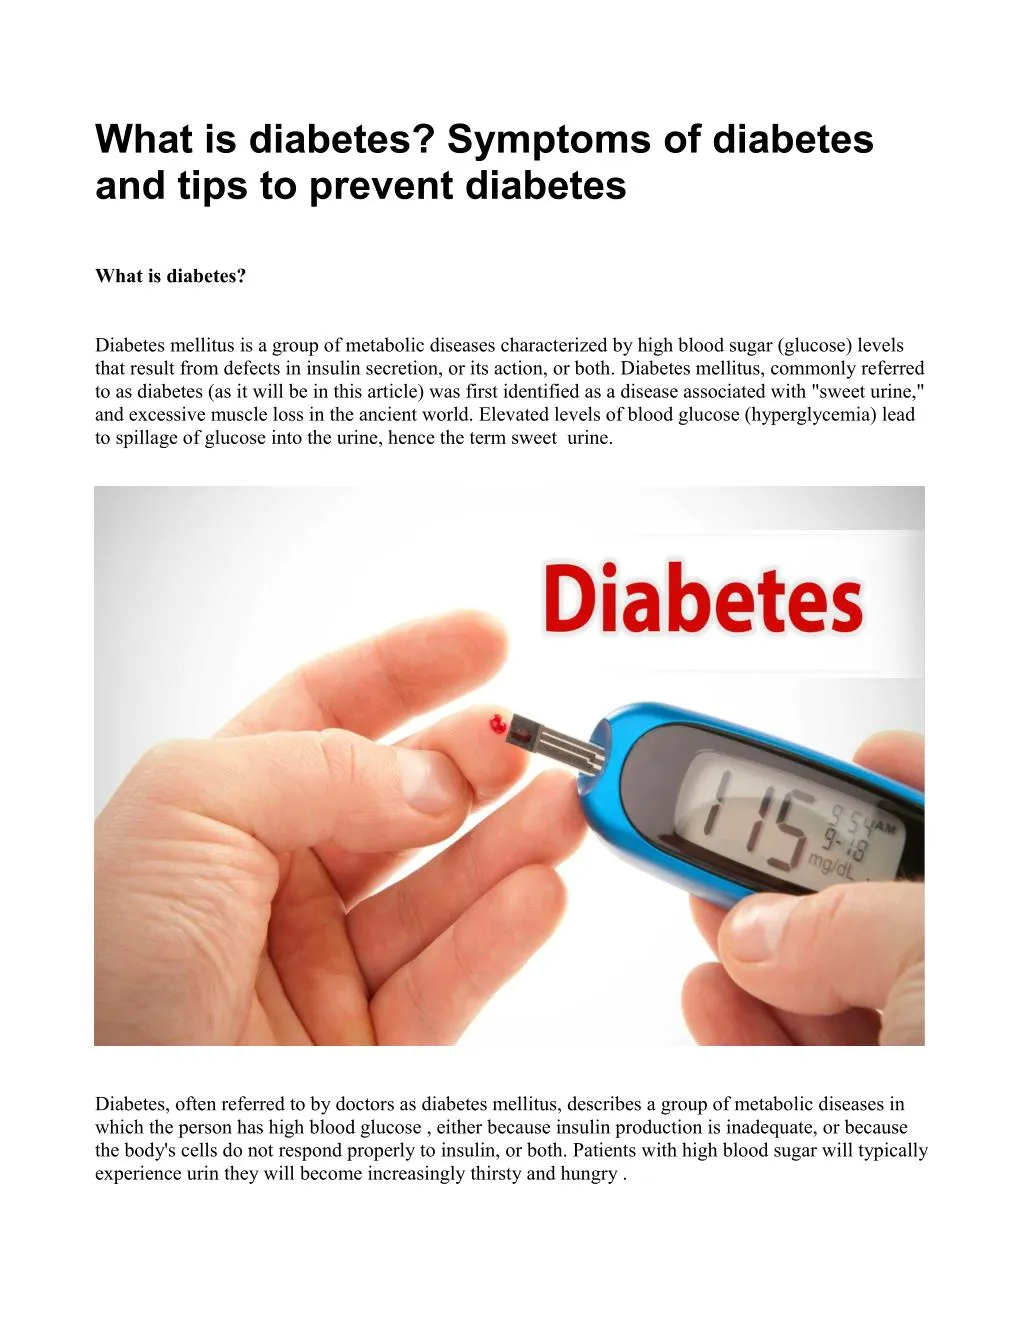 what is diabetes symptoms of diabetes and tips